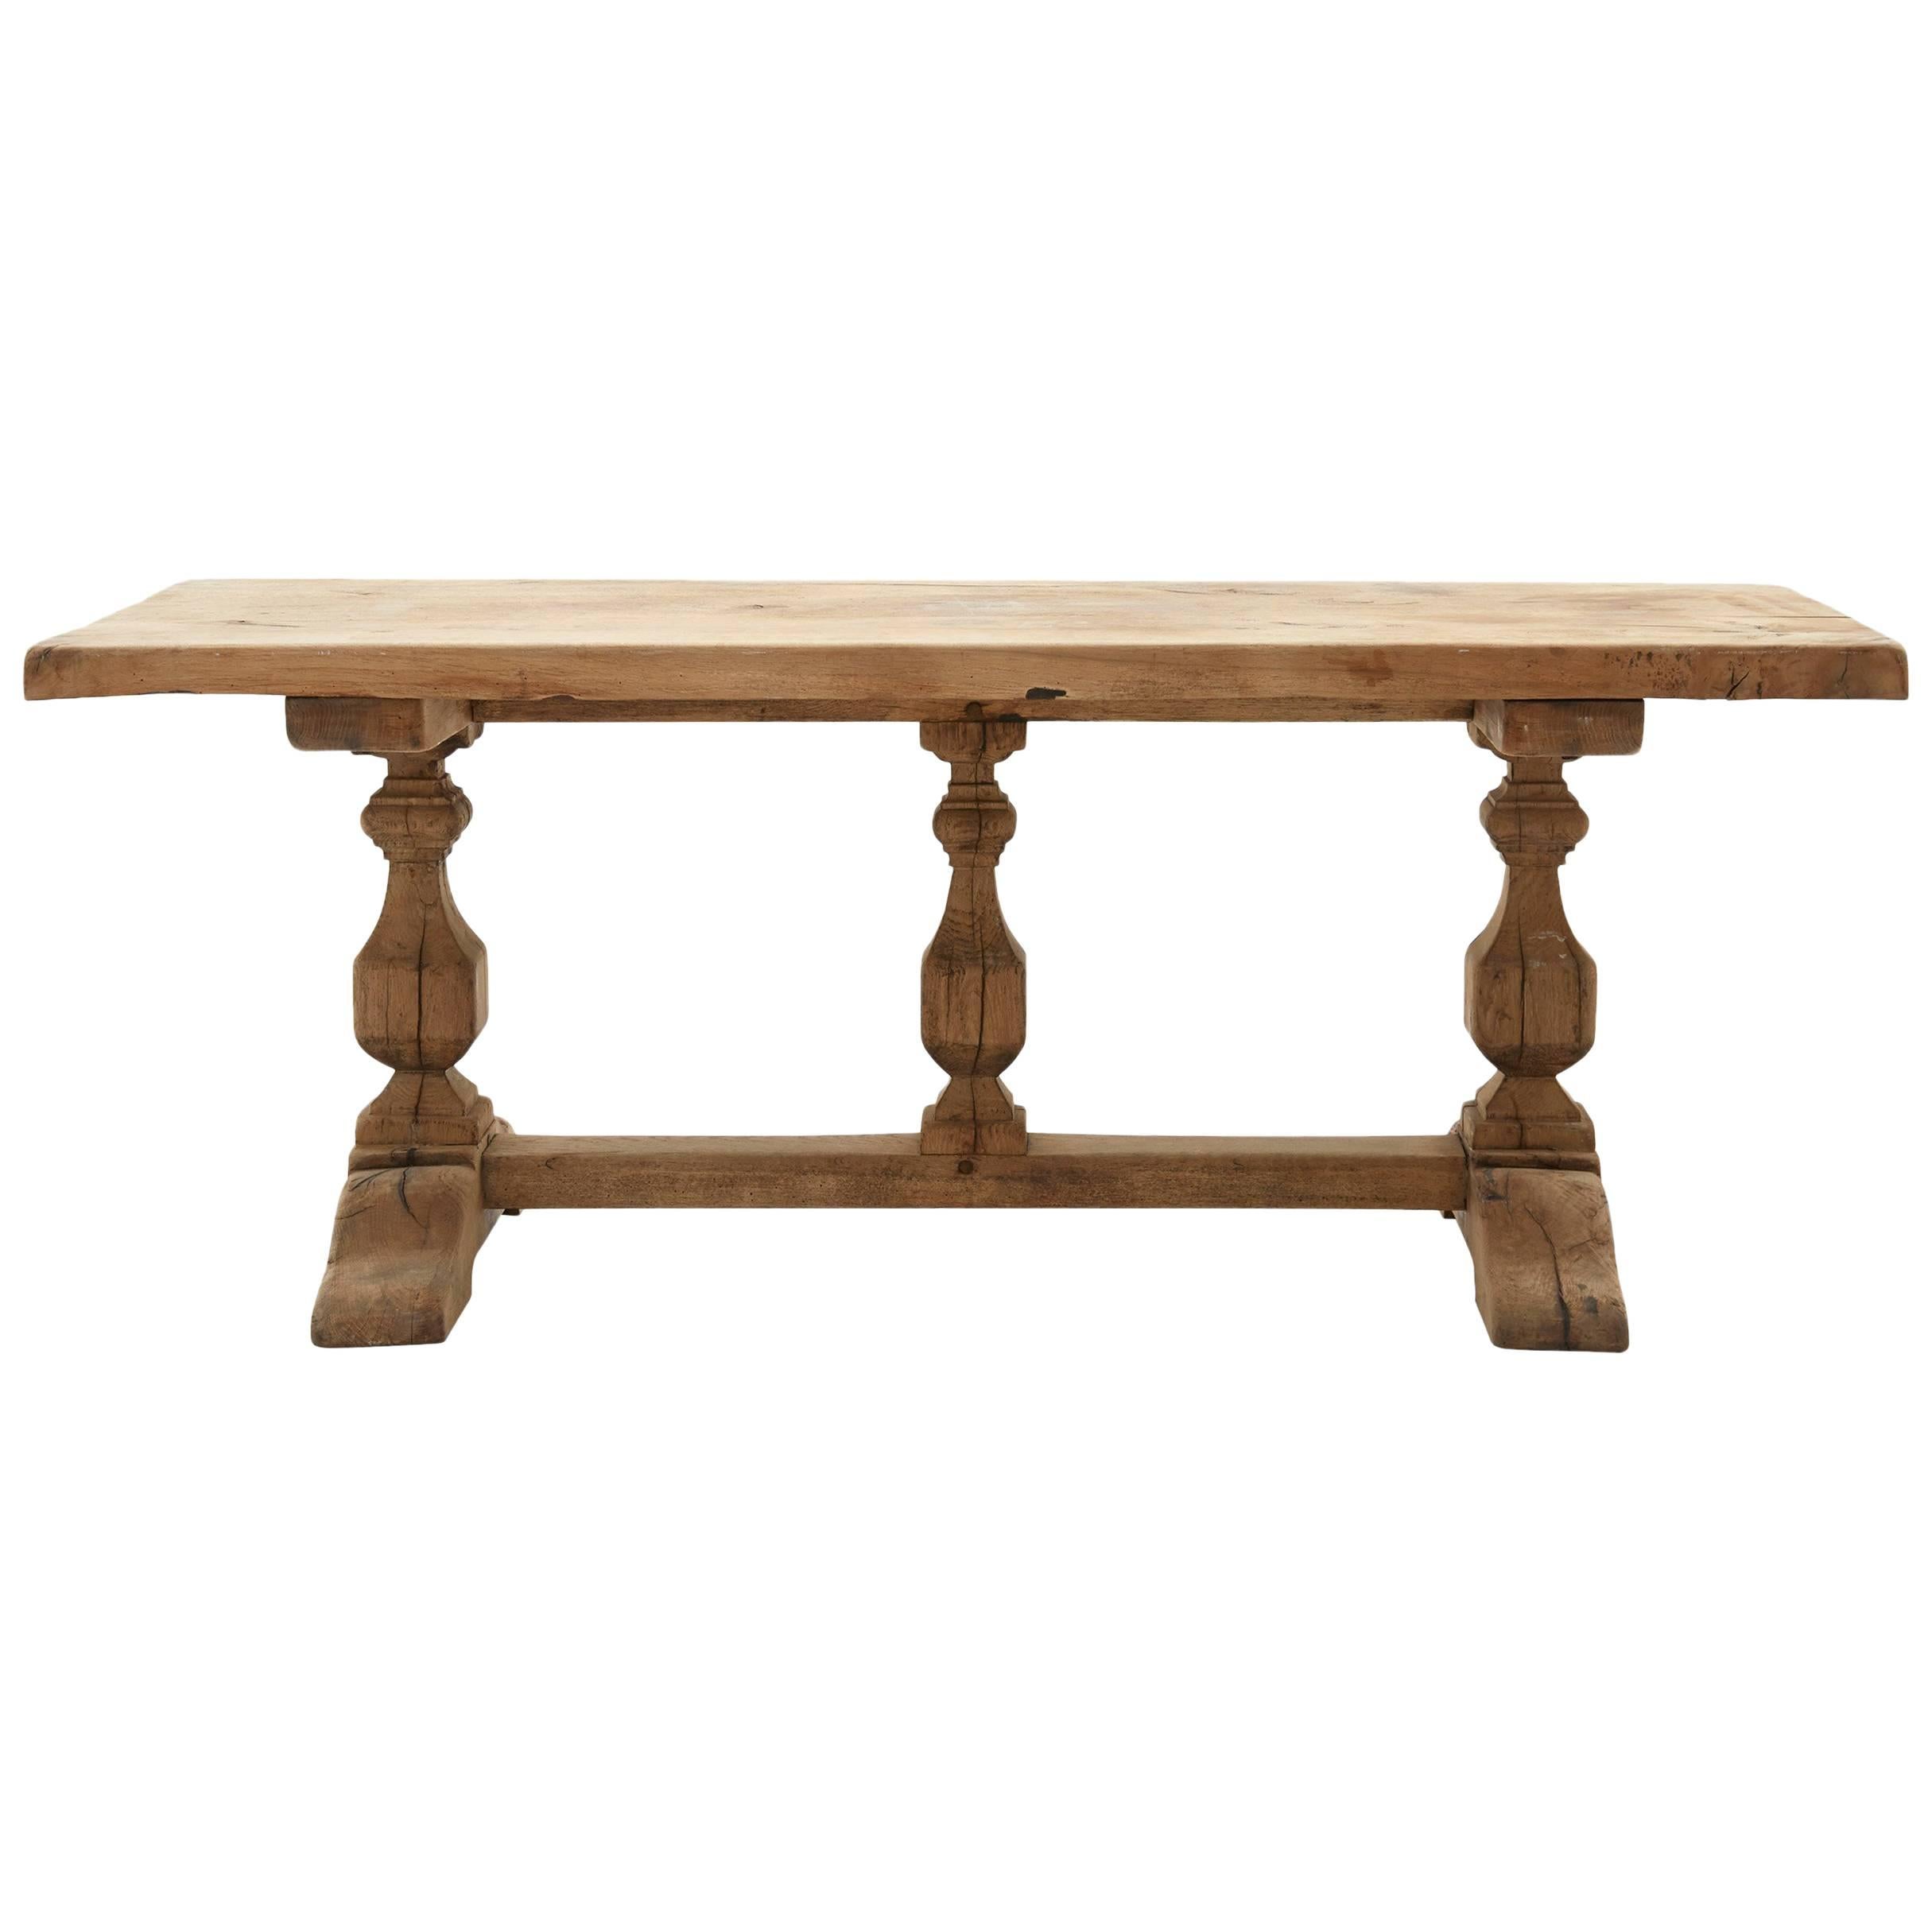 19th Century French Pyrenees Dining Table